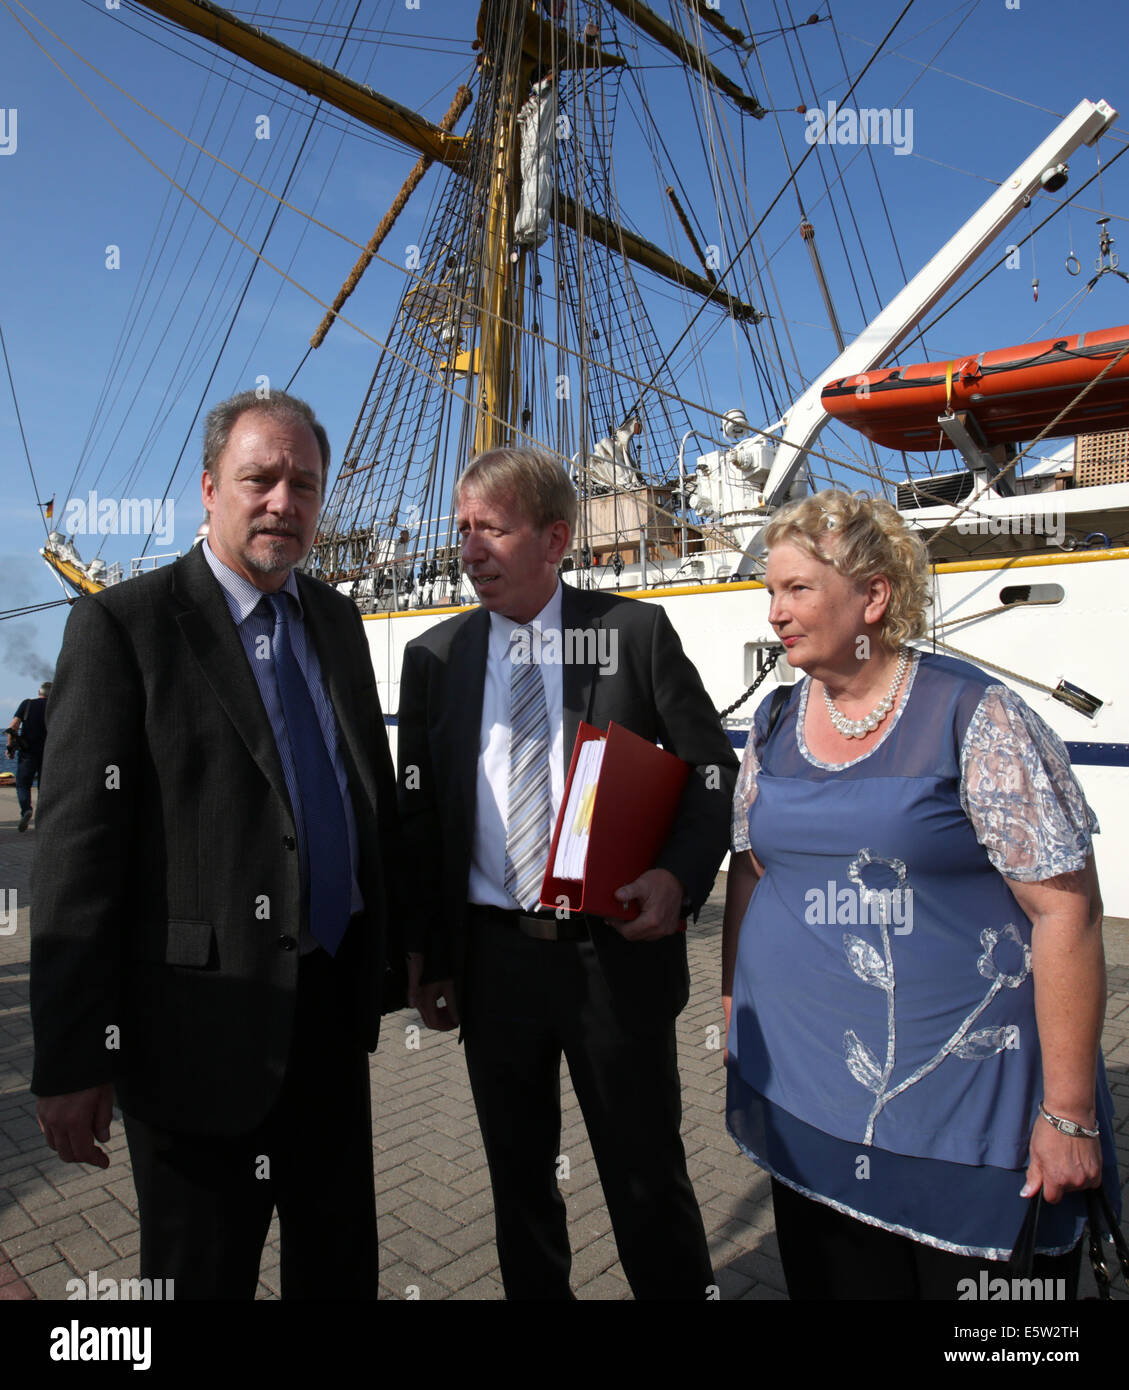 Rostock-Warnemuende, Germany. 06th Aug, 2014. Attorney Rainer Dietz (C) and the parents of Jenny Boeken, who was killed in an accident on board of the 'Gorch Fock', Marlis and Uwe Boeken, stand in front of the sailing school ship in Rostock-Warnemuende, Germany, 06 August 2014. Representatives of the administrative court Aachen are going to investigate on site if there was a particular danger of life during the service practice. The parents claimed for indemnification of 40,000 euros from the Federal Republic of Germany. Photo: Bernd Wuestneck/dpa/Alamy Live News Stock Photo